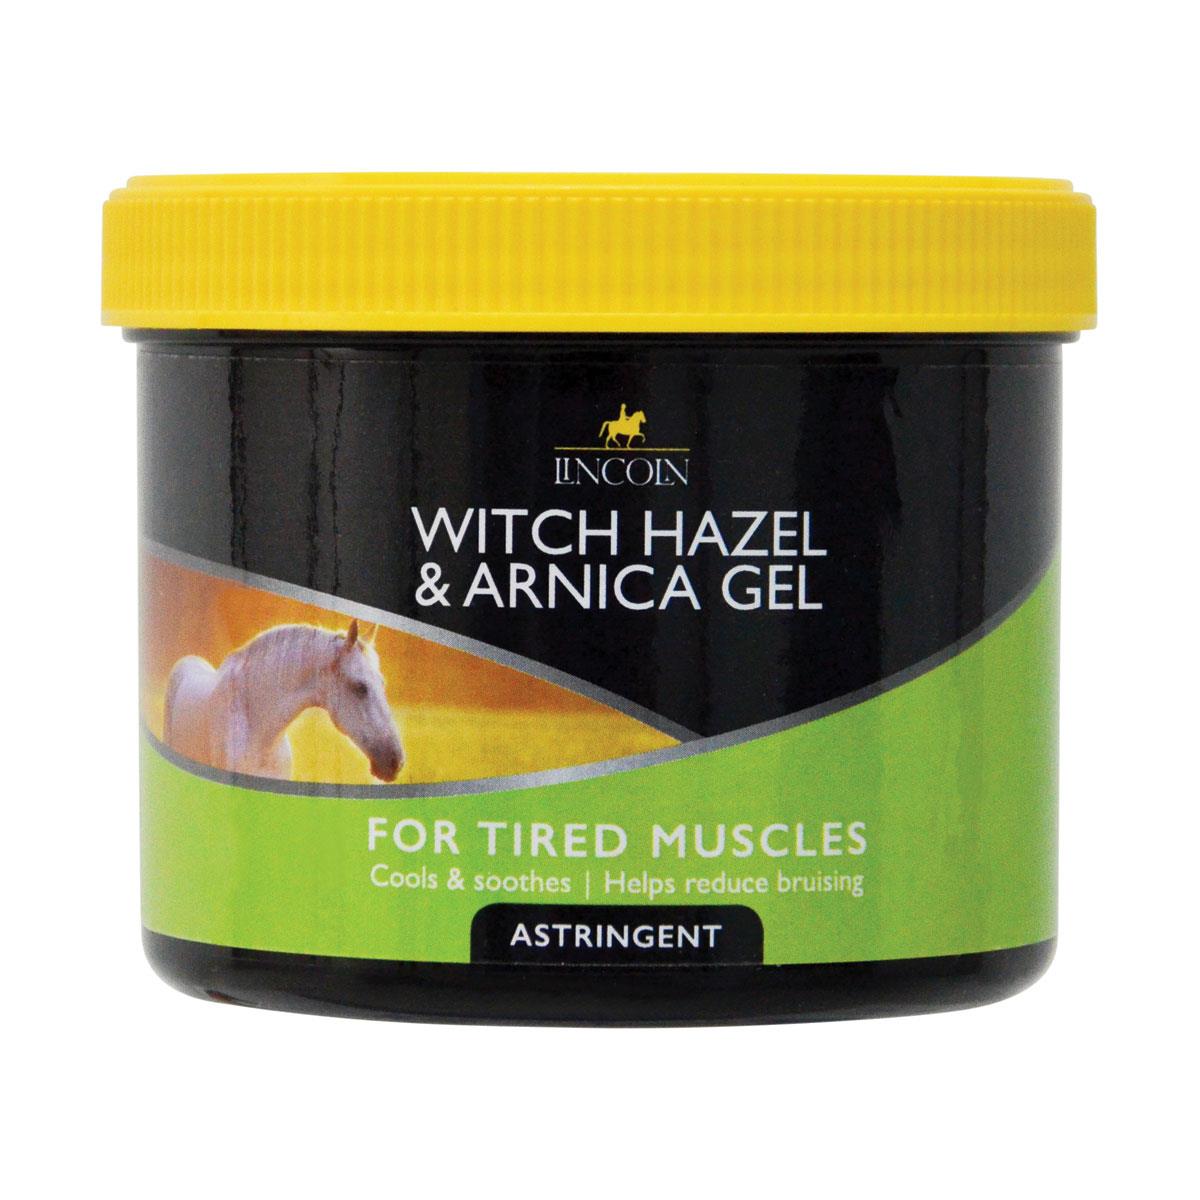 Lincoln Witch Hazel & Arnica Gel - Soothes tired muscles and supports natural recovery, ideal for use on bruised skin with a pleasant fragrance.